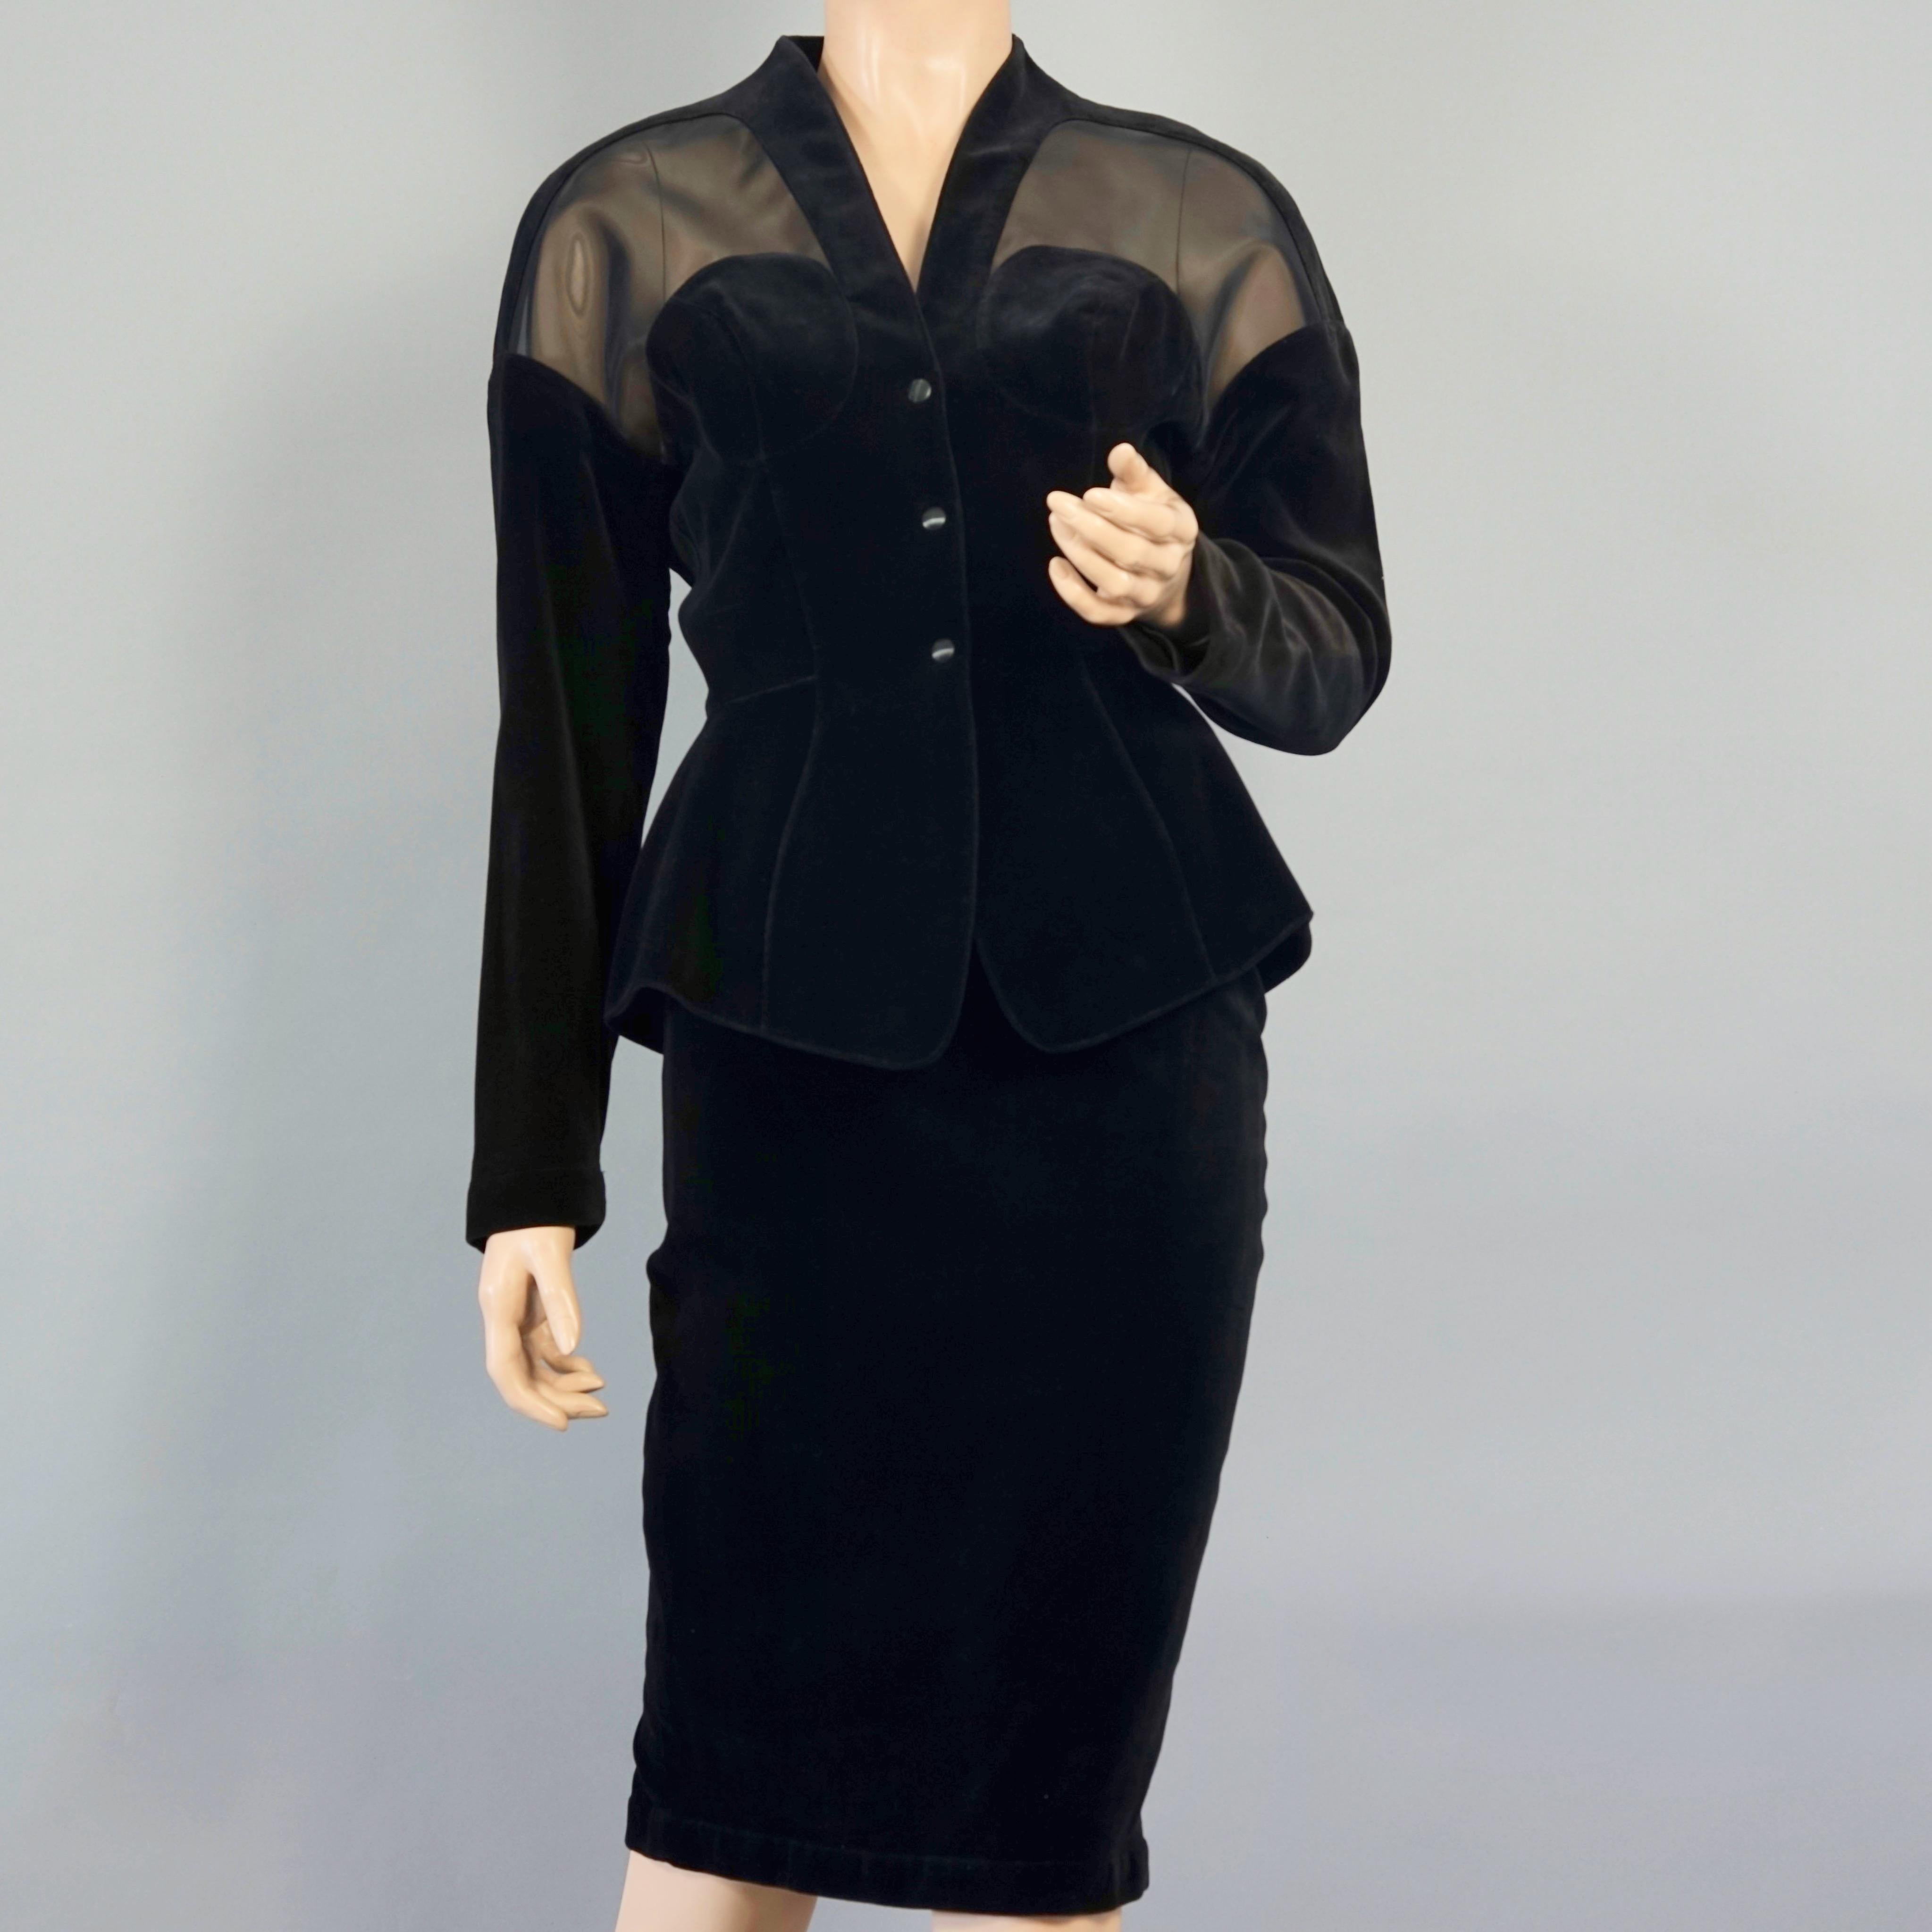 Vintage THIERRY MUGLER Bustier Structured Transparent Velvet Jacket Skirt Suit

Measurements taken laid flat, please double bust, waist and hips :
JACKET/ BLAZER
Shoulders: 22 inches (56 cm)
Sleeves: 18.50 inches (47 cm)
Bust: 19.68 inches (50